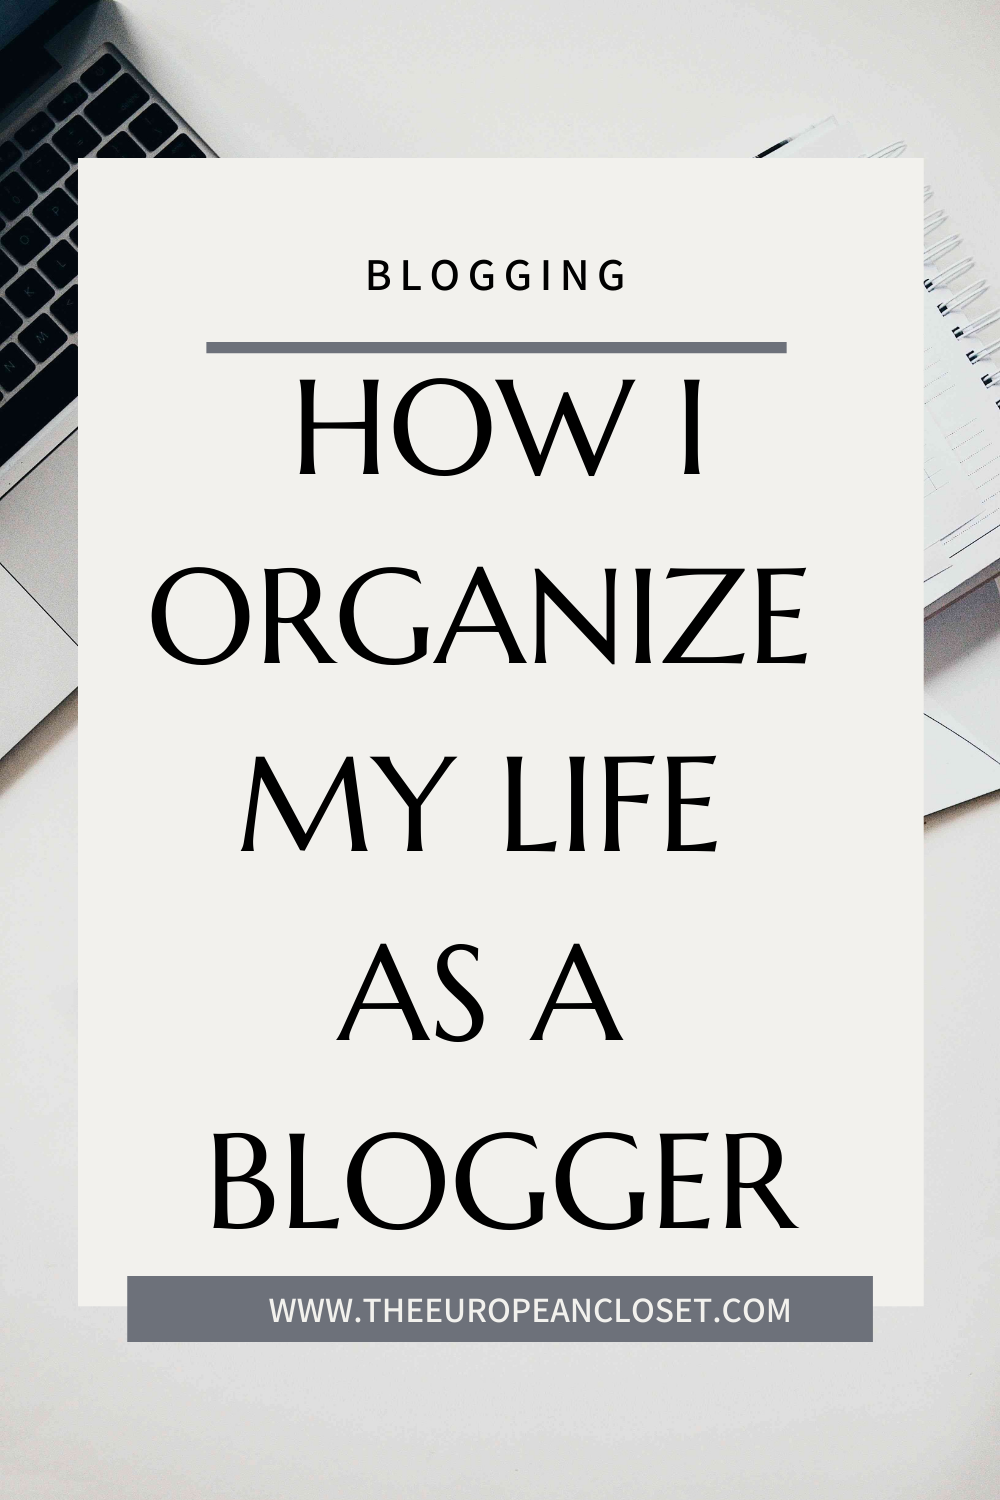 Blogging takes a lot more work than people imagine so I'm always looking for new ways to organize my life as a blogger to make it as easy on me as possible. Every year, I go through all the tools I use and plan out what the next year will (hopefully) look like. 2021 was no exception.